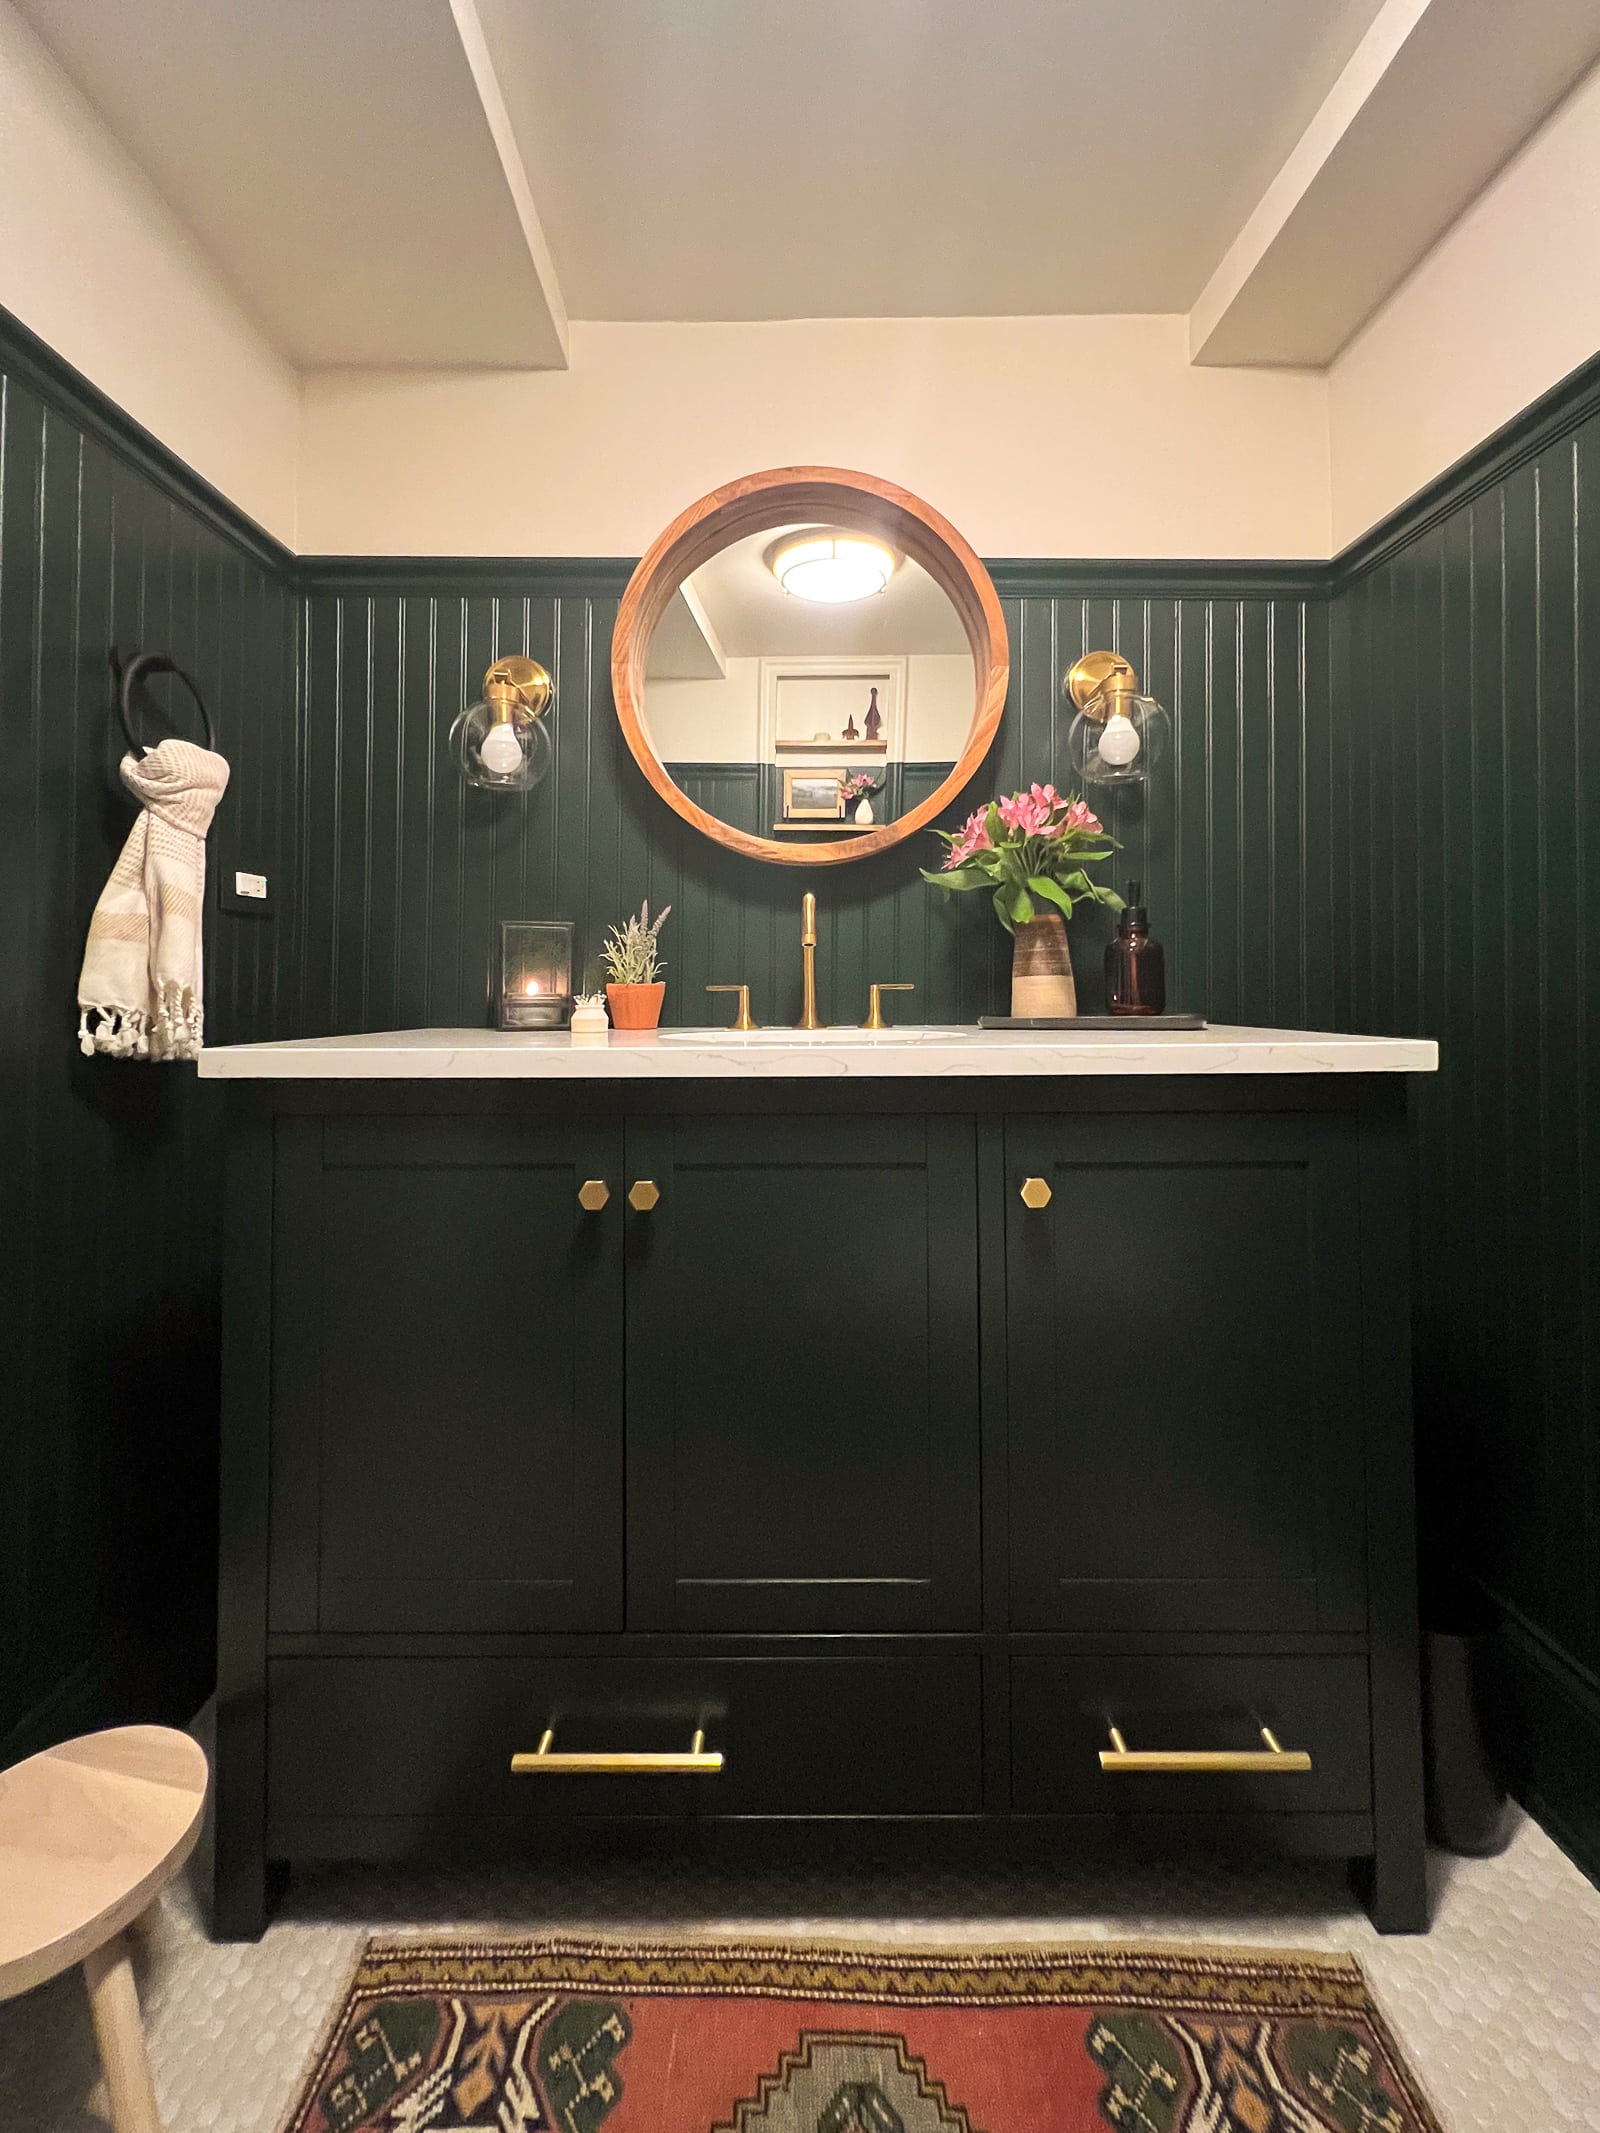 The reveal of our dark green bathroom